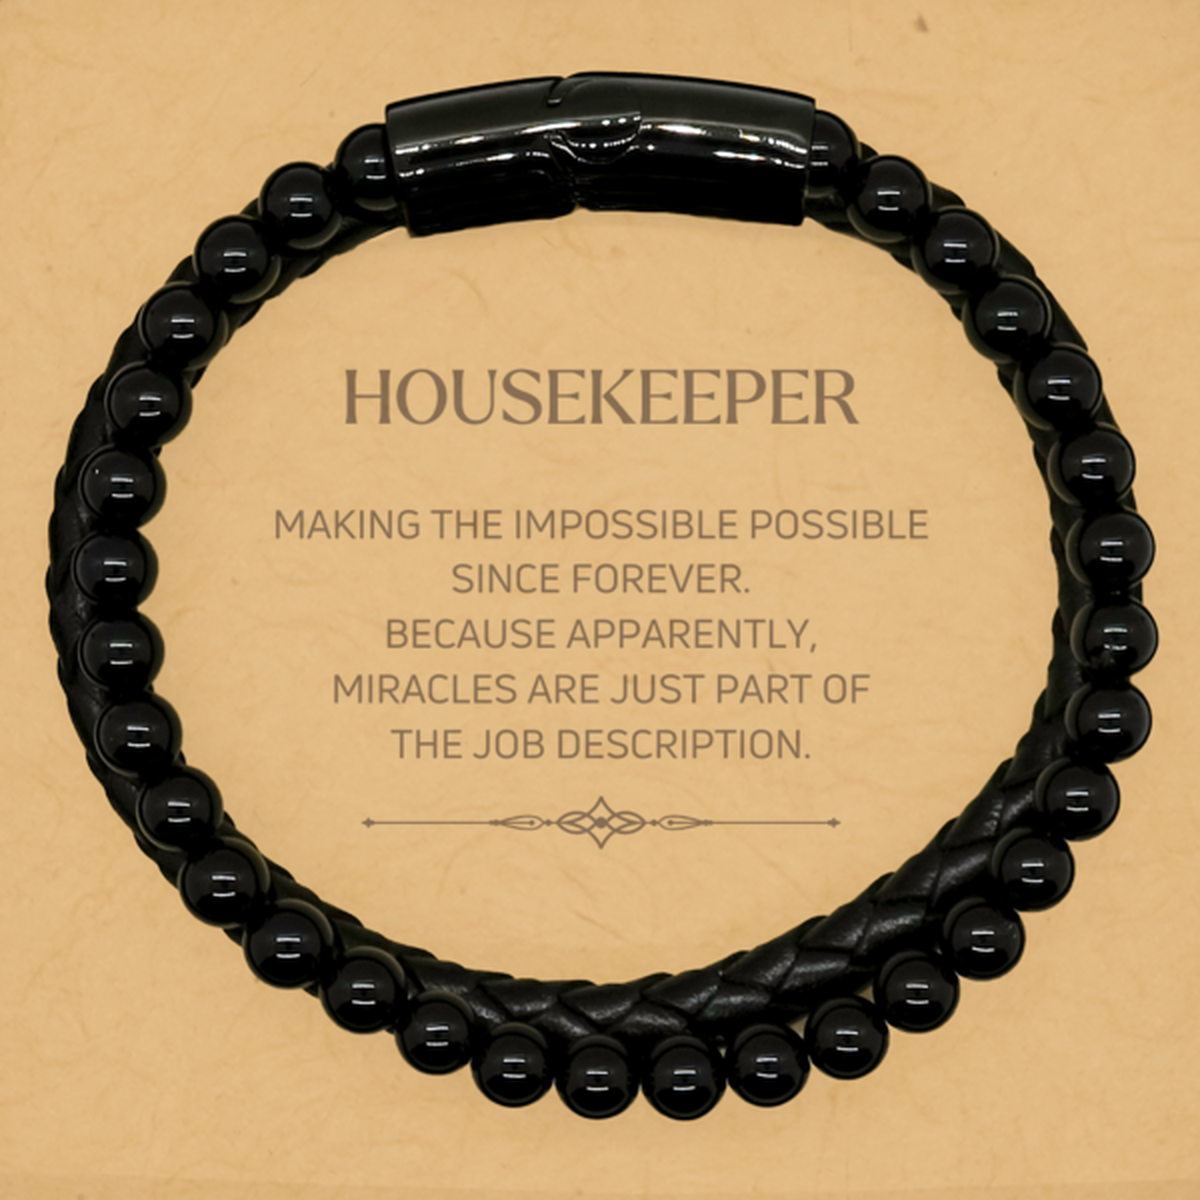 Funny Housekeeper Gifts, Miracles are just part of the job description, Inspirational Birthday Stone Leather Bracelets For Housekeeper, Men, Women, Coworkers, Friends, Boss